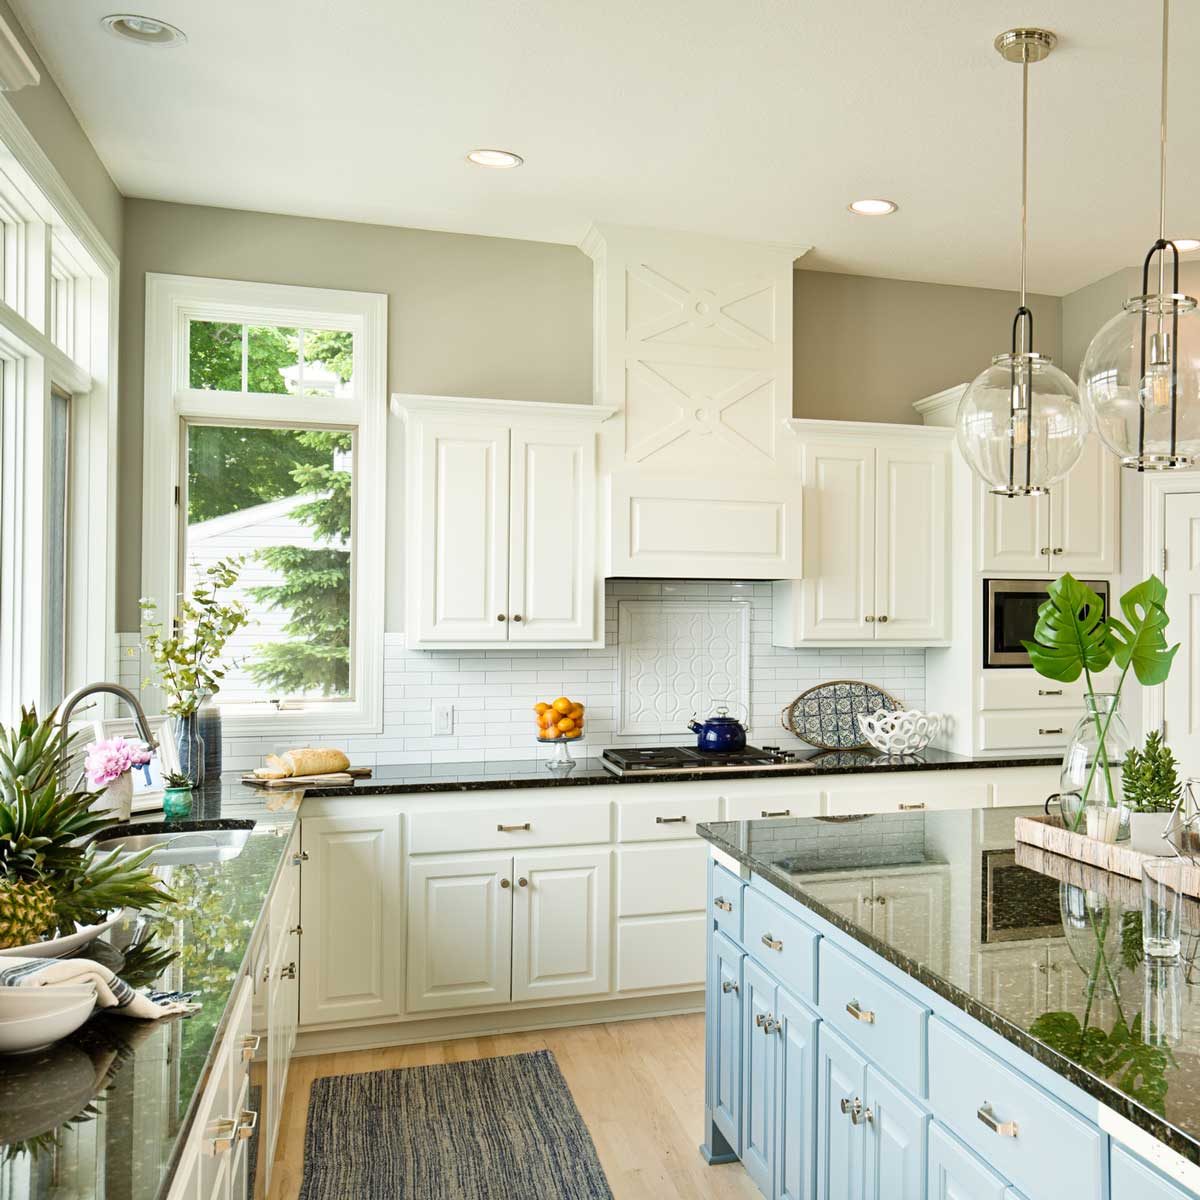 8 Kitchen Remodel Tips for a Happier Experience